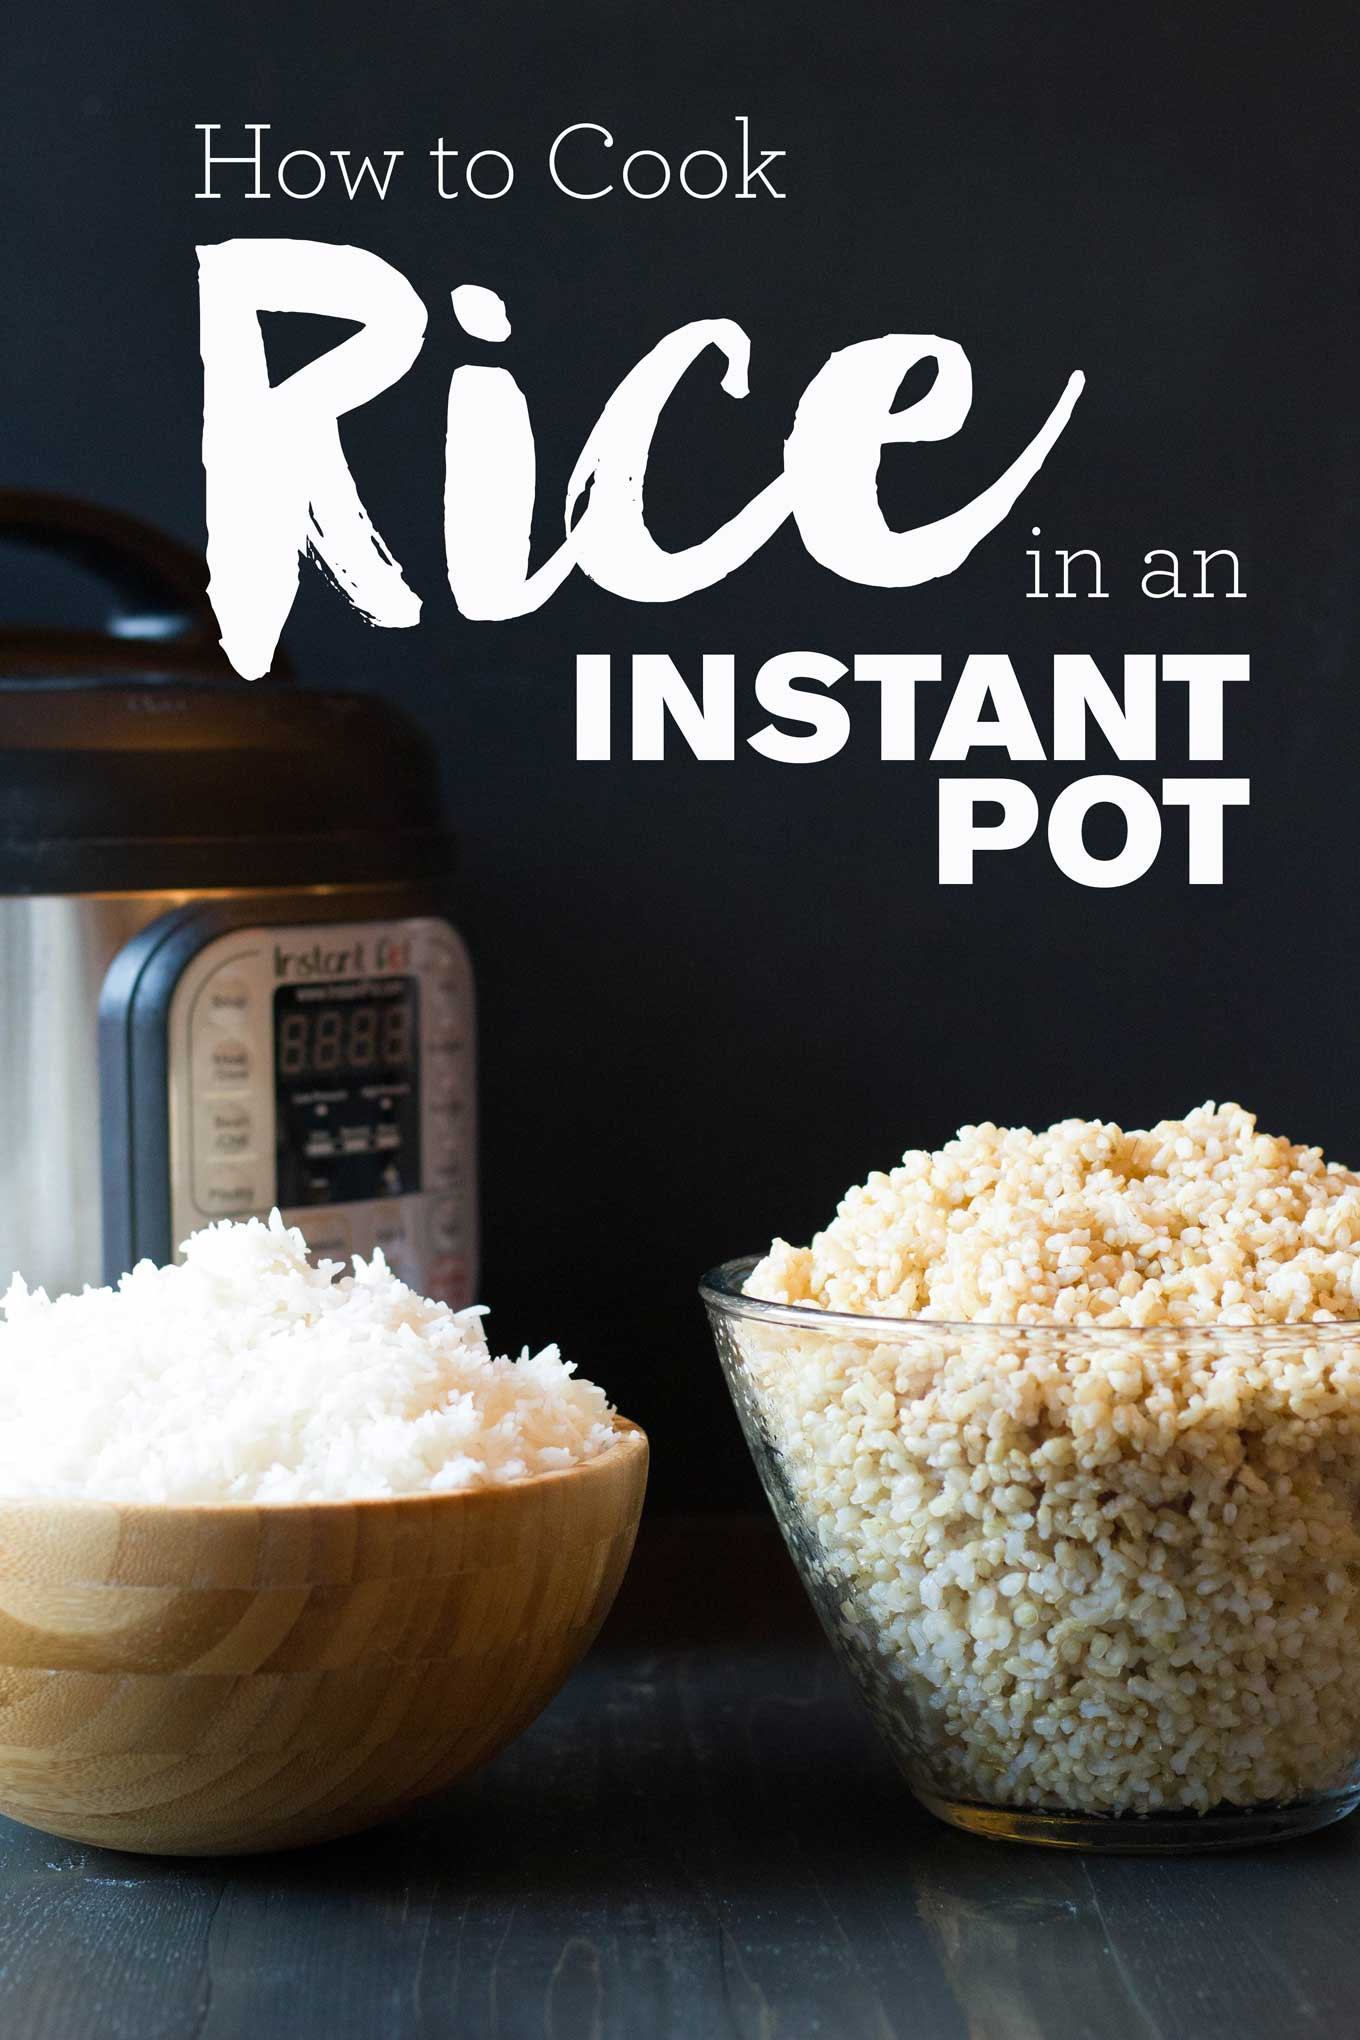 Cooking Brown Rice In Instant Pot
 How to Cook Rice in an Instant Pot